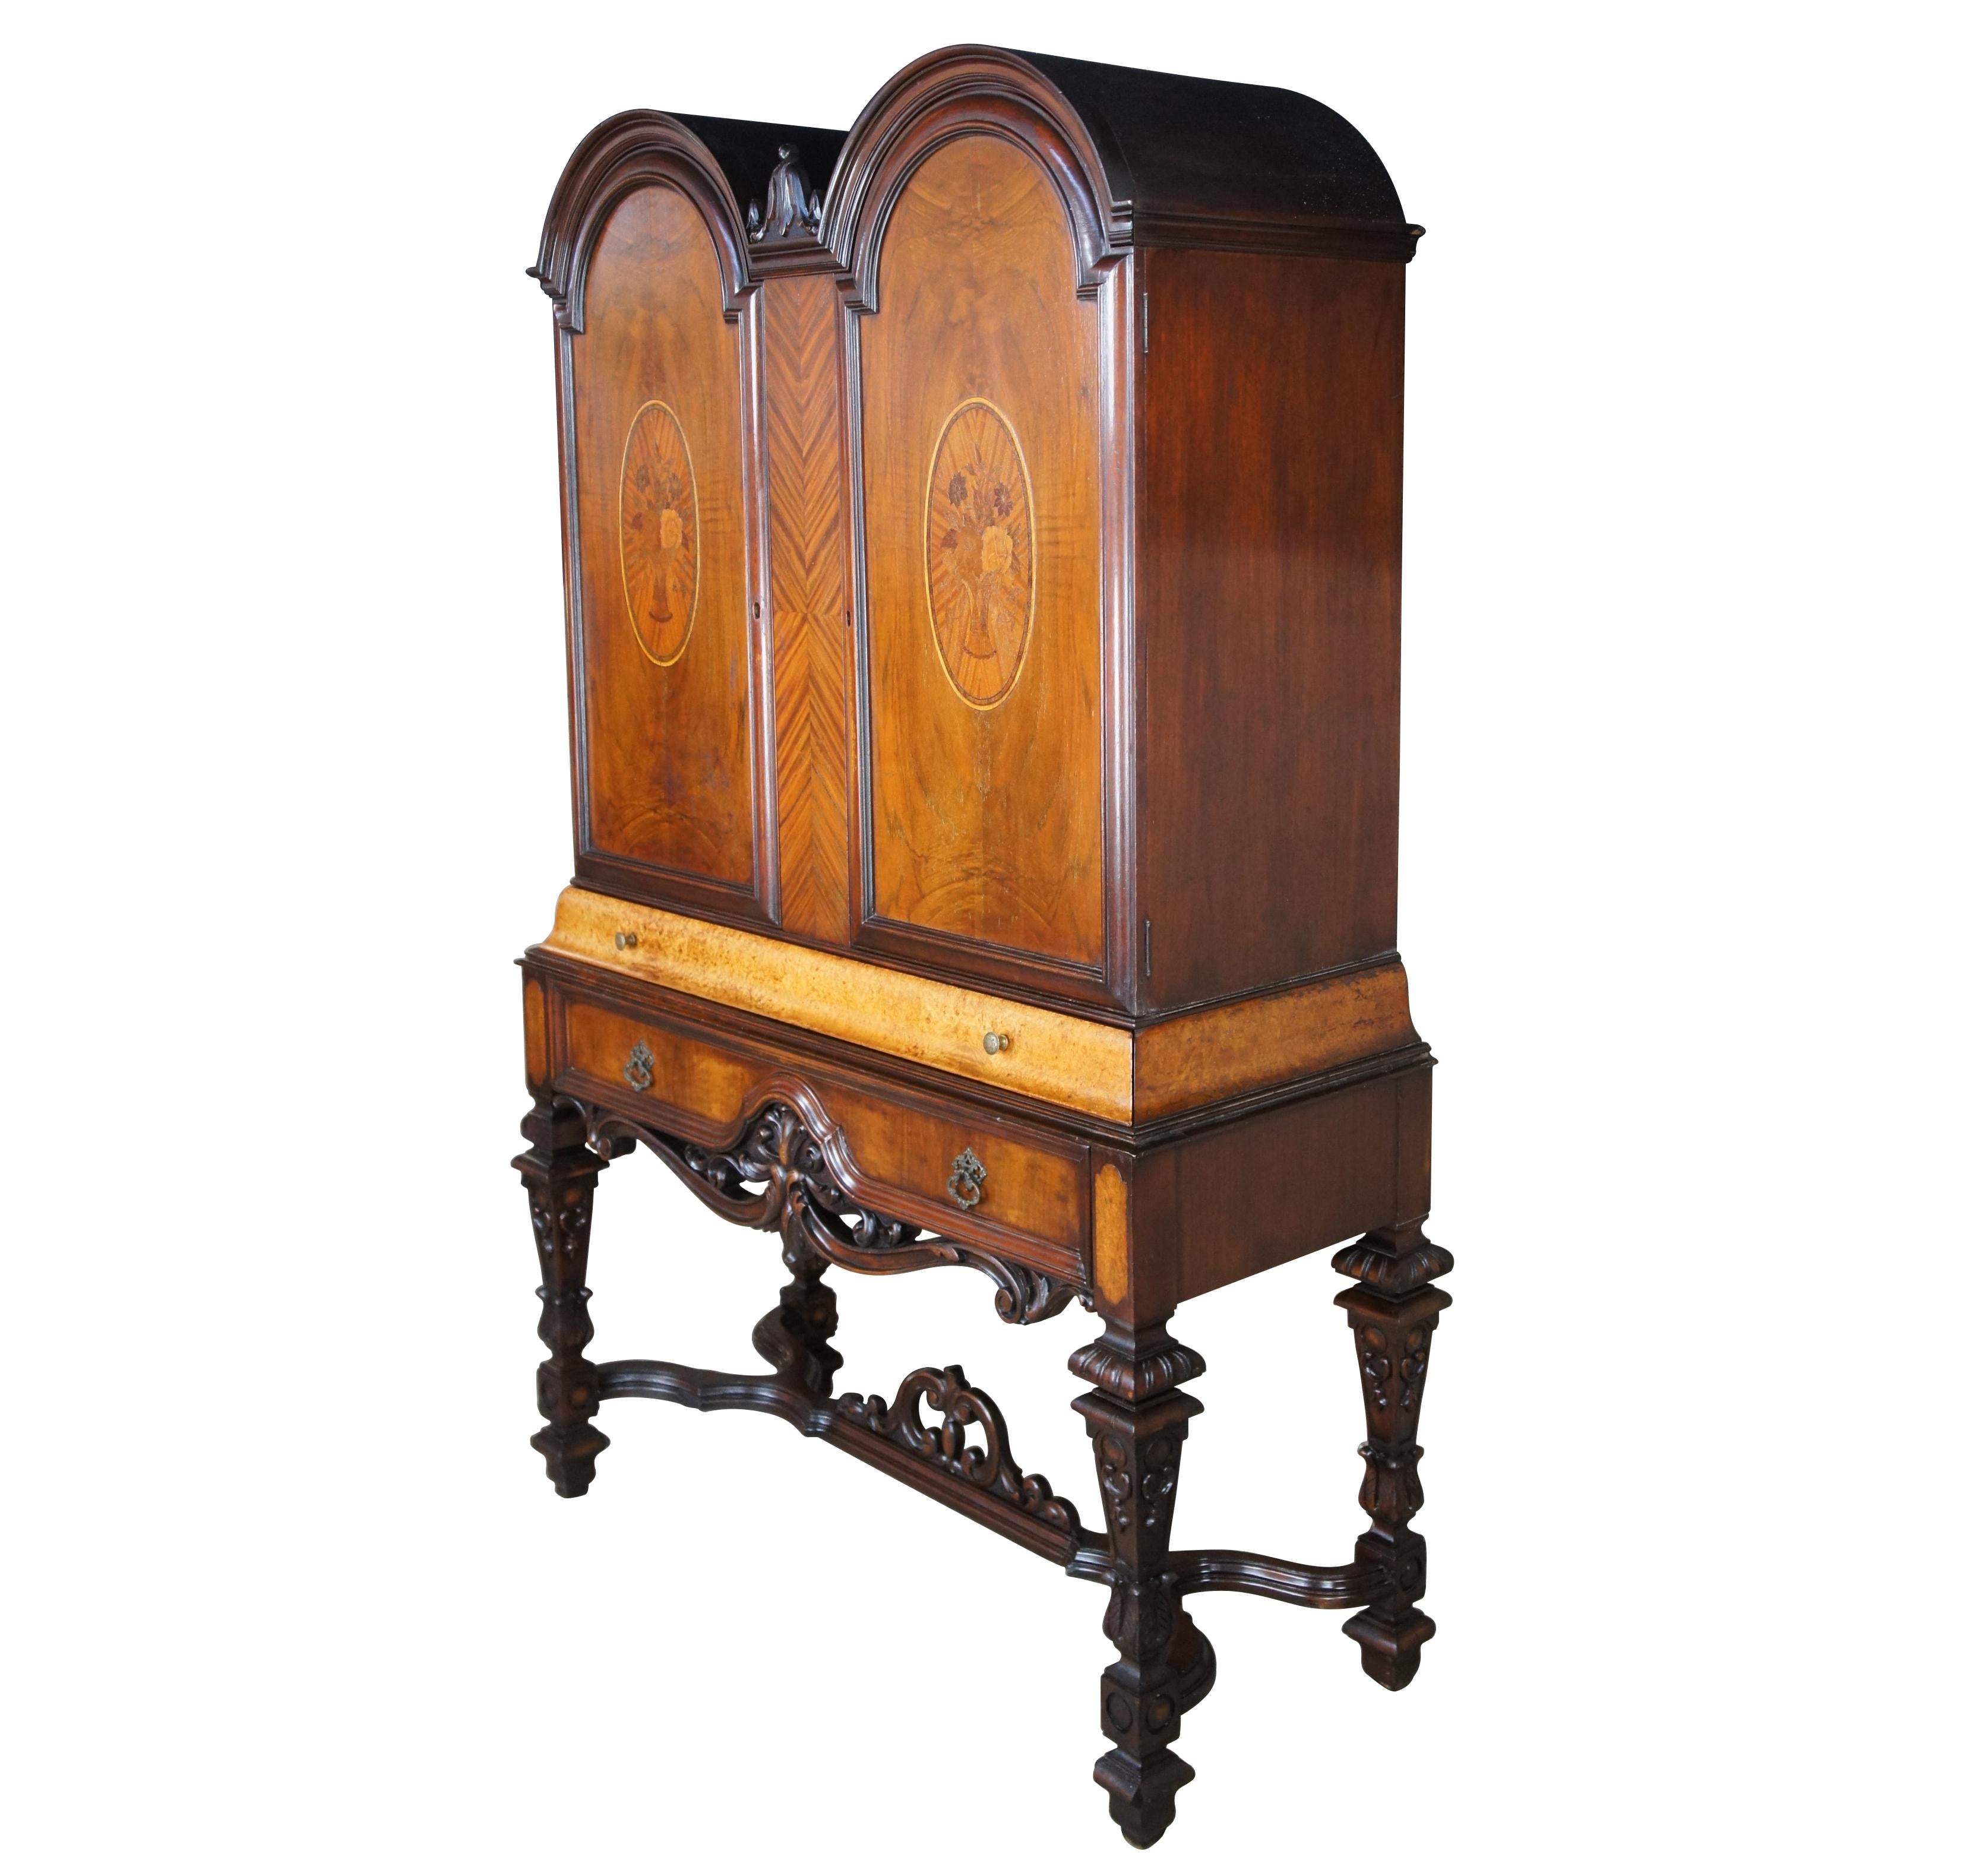 A beautiful early 20th century Renaissance Revival china hutch or bookcase. Made from walnut with exotic floral marquetry inlays, matchbook veneer and eye catching burl. The cabinet features an arched arcade form over a cornice drawer and larger